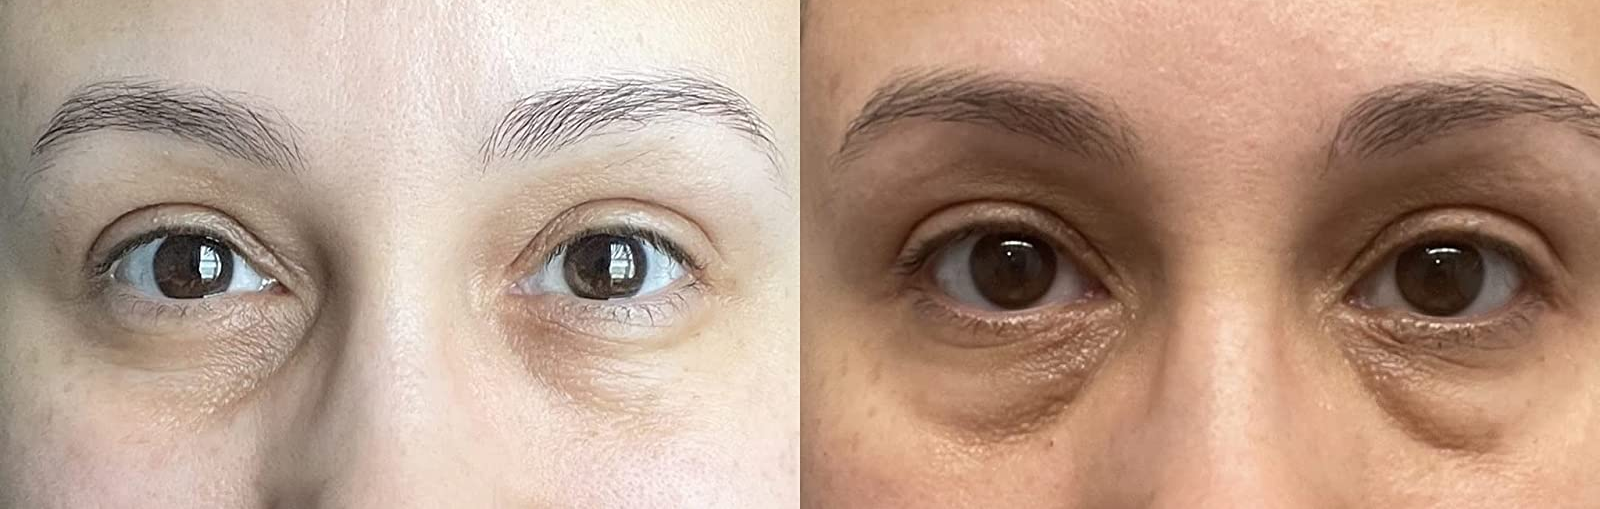 on left, reviewer with less bags under eye after using eye cream. on right, same reviewer with more defined under-eye bags and dark circles before using the eye cream